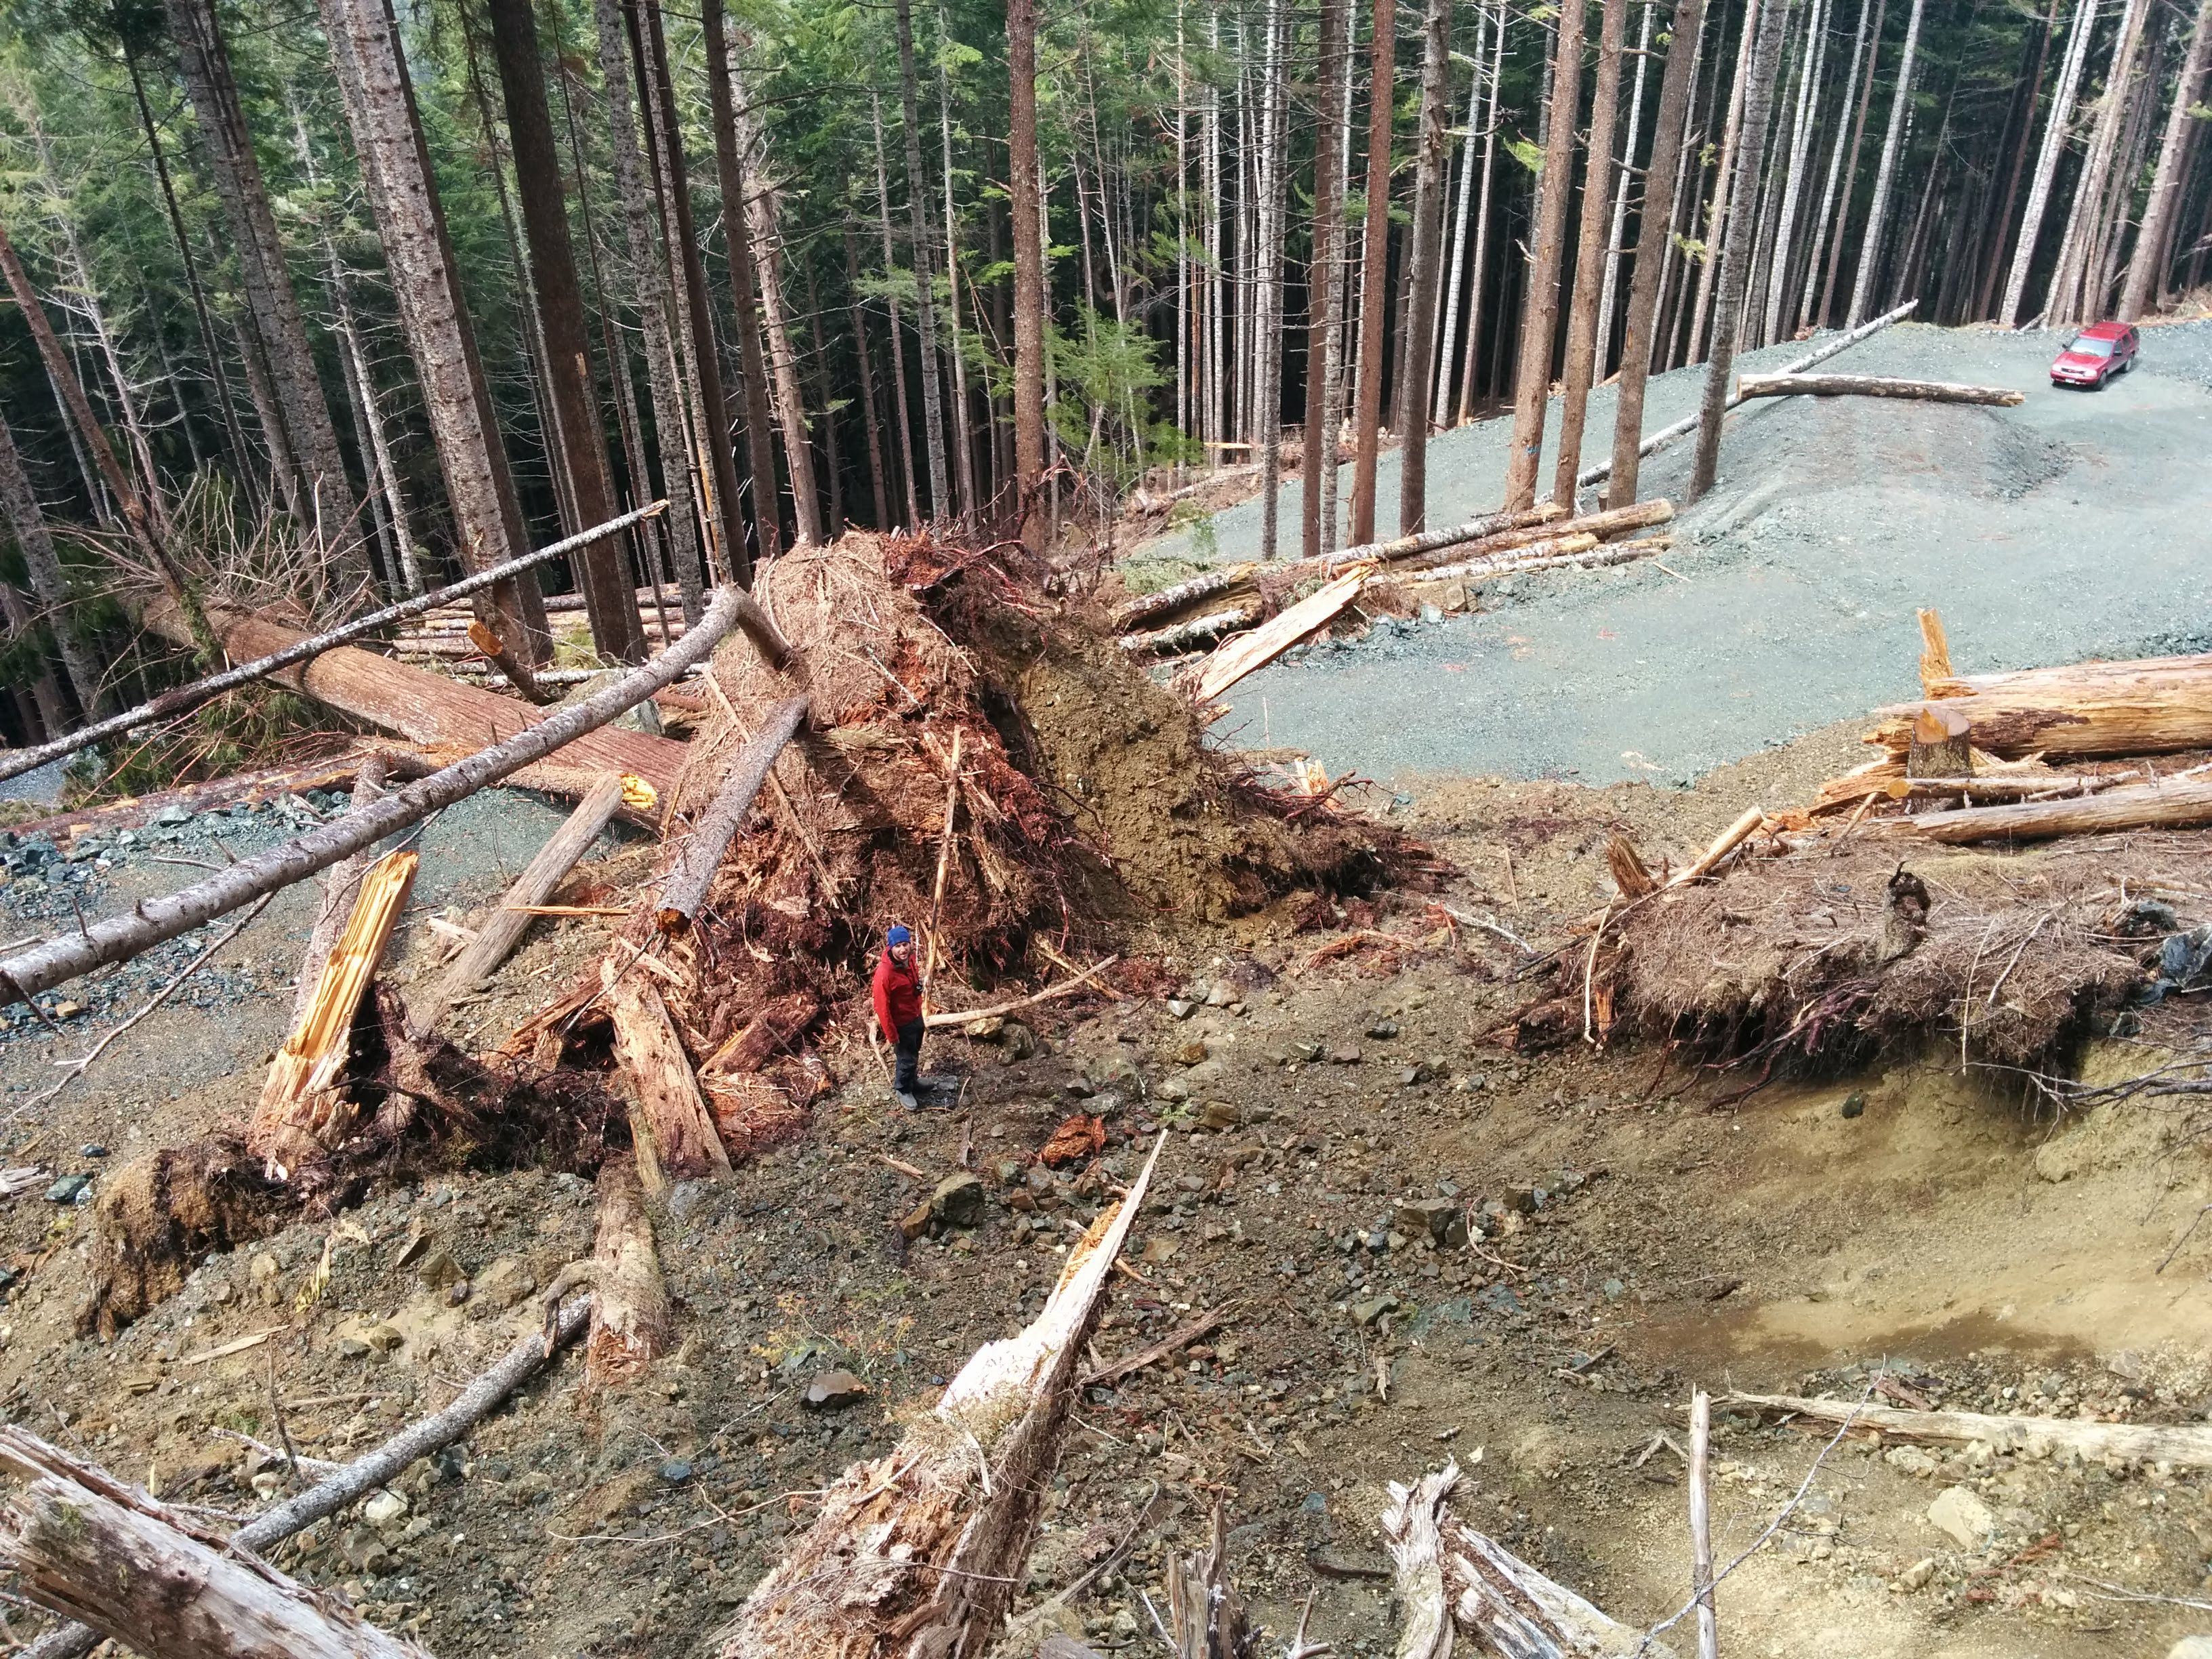 Wilderness Committee Campaigner Torrance Coste checks out logging activity in Schmidt Creek